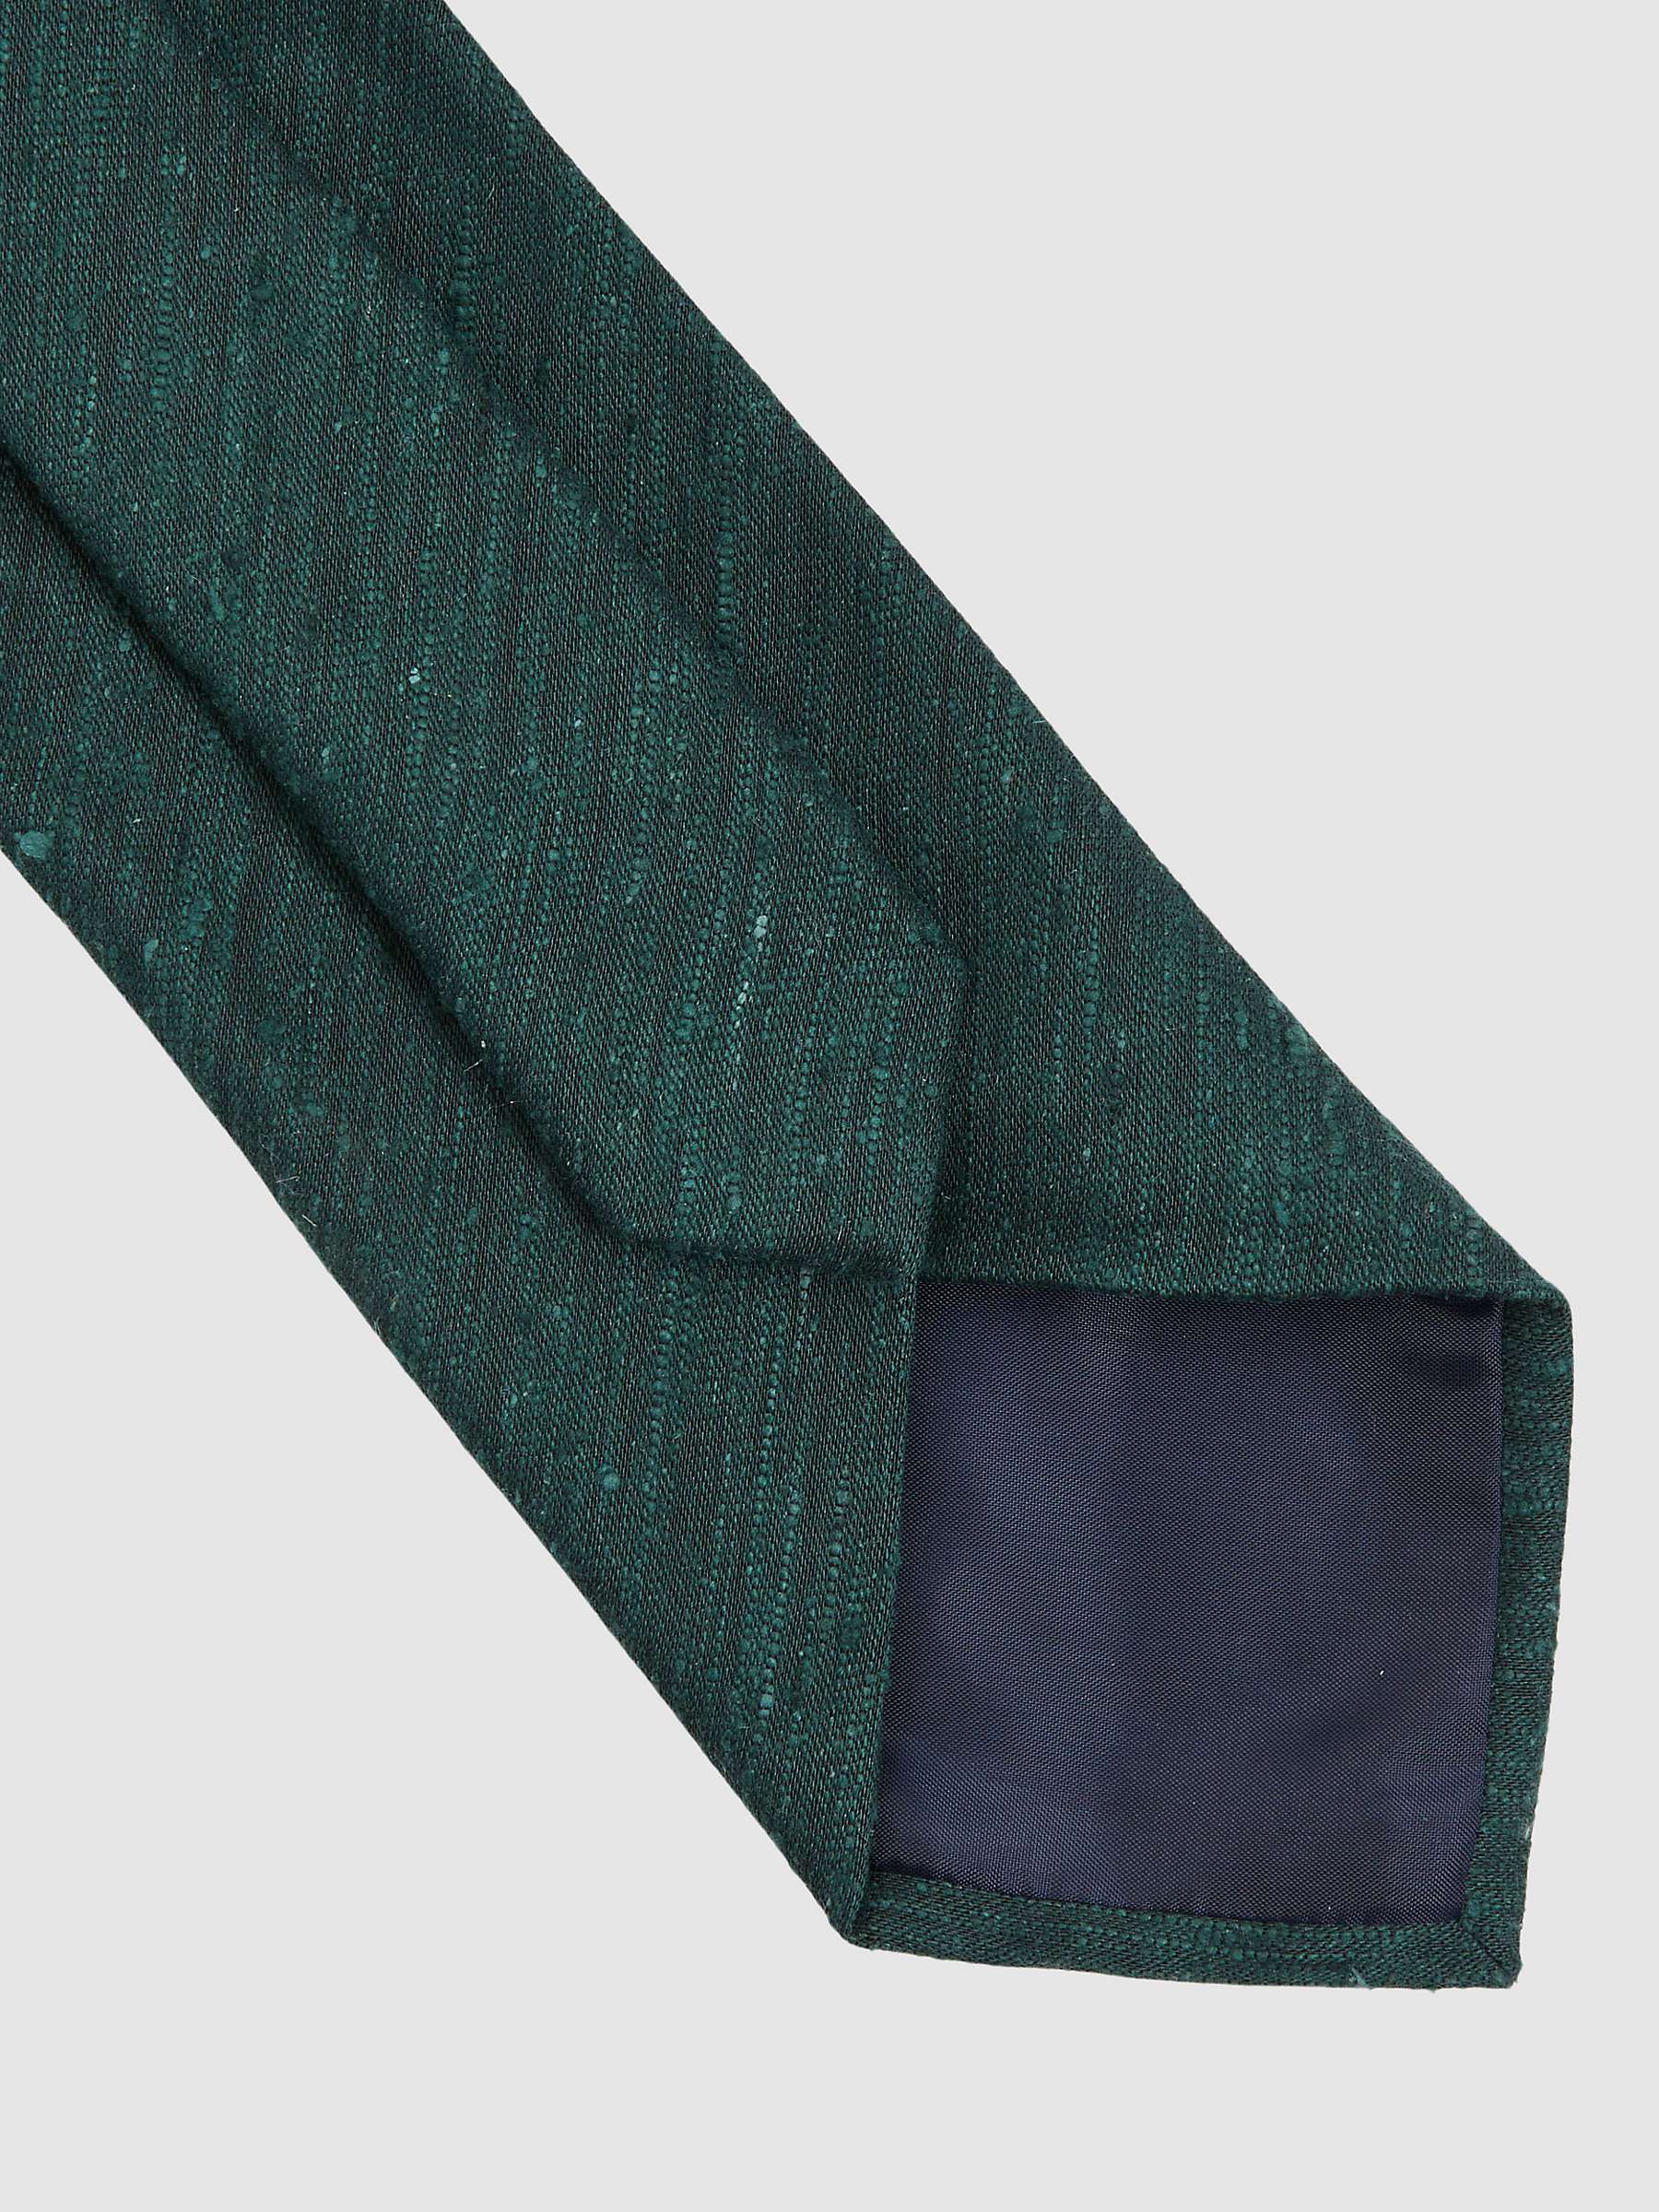 Buy Reiss Giotto Textured Silk Tie, Hunting Green Online at johnlewis.com